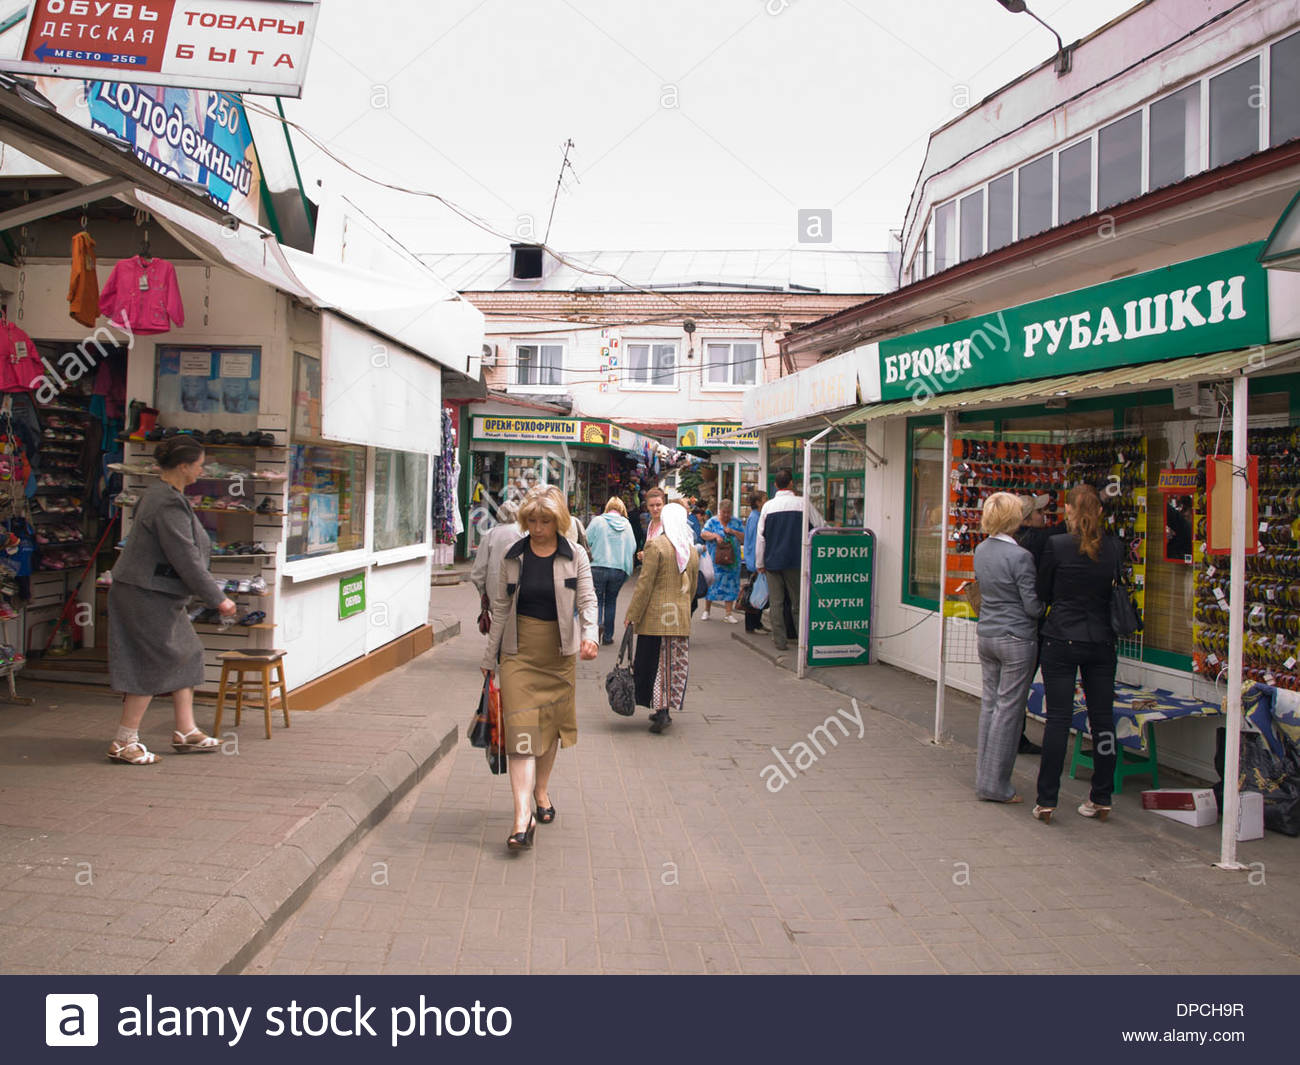 central-market-in-yaroslavl-russia-small-shops-selling-anything-you-DPCH9R.jpg